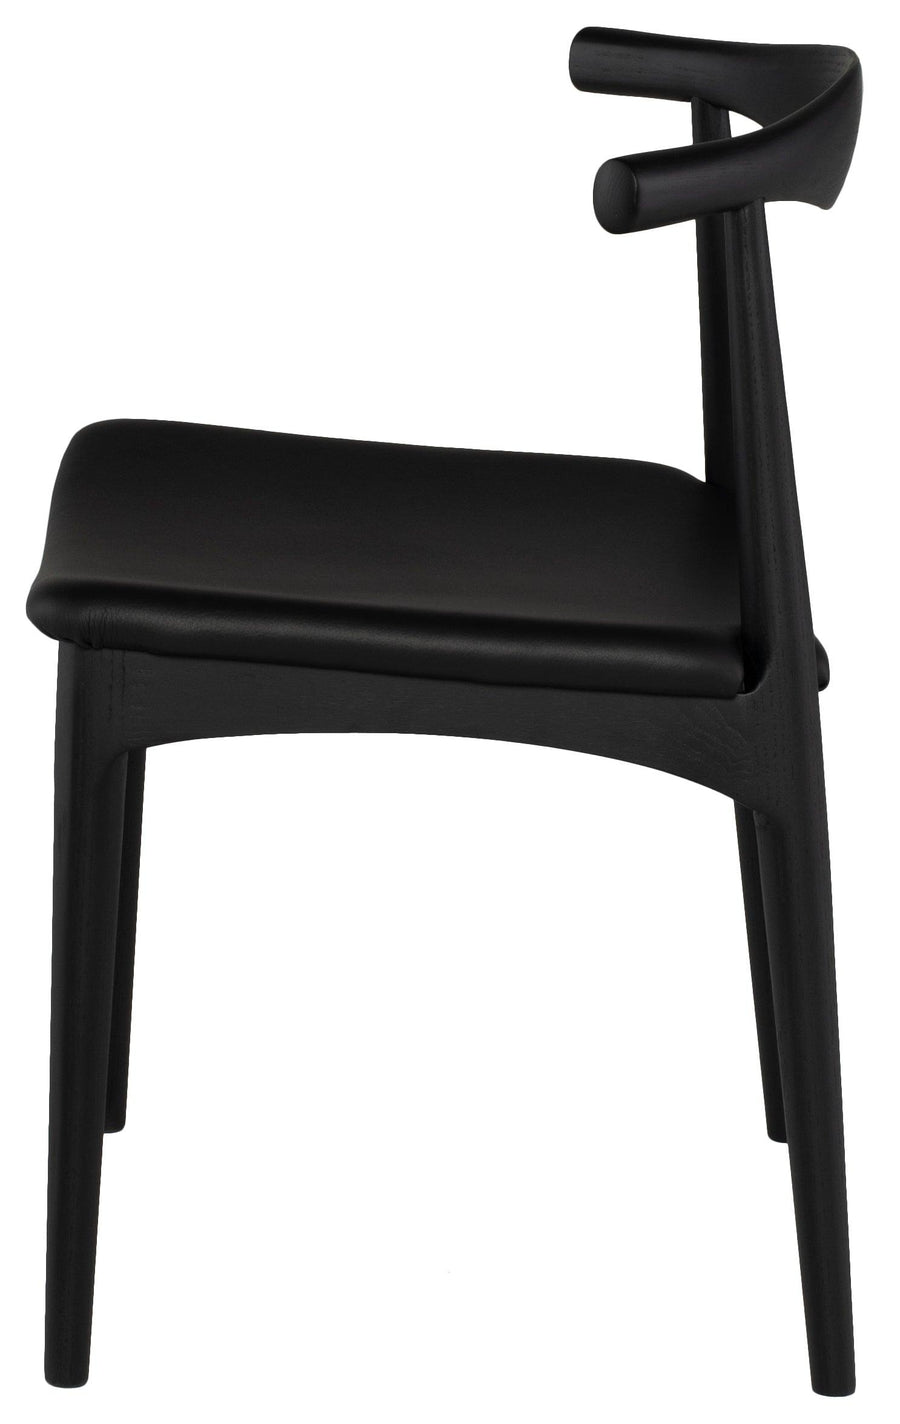 Saal Dining Chair-Black - Maison Vogue